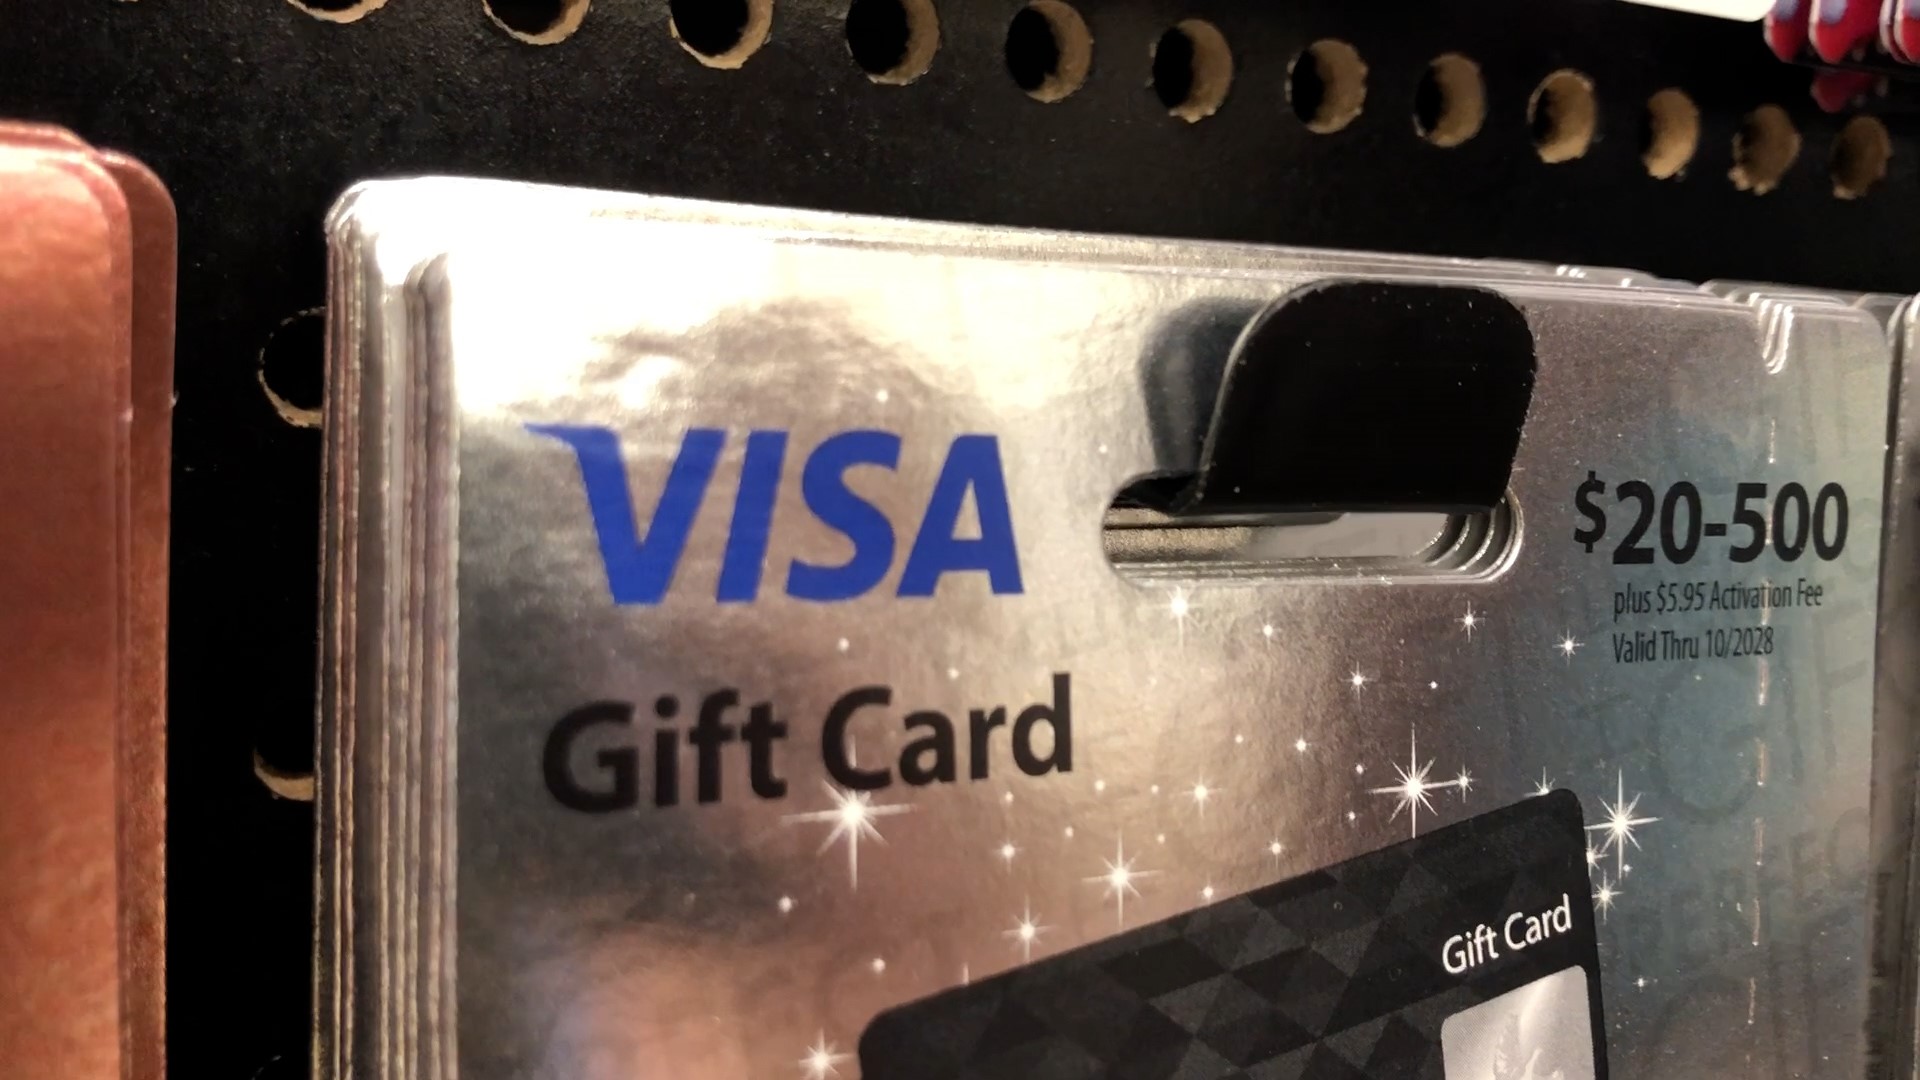 AARP officials say they have seen a significant increase in scammers seeking payment through gift cards.